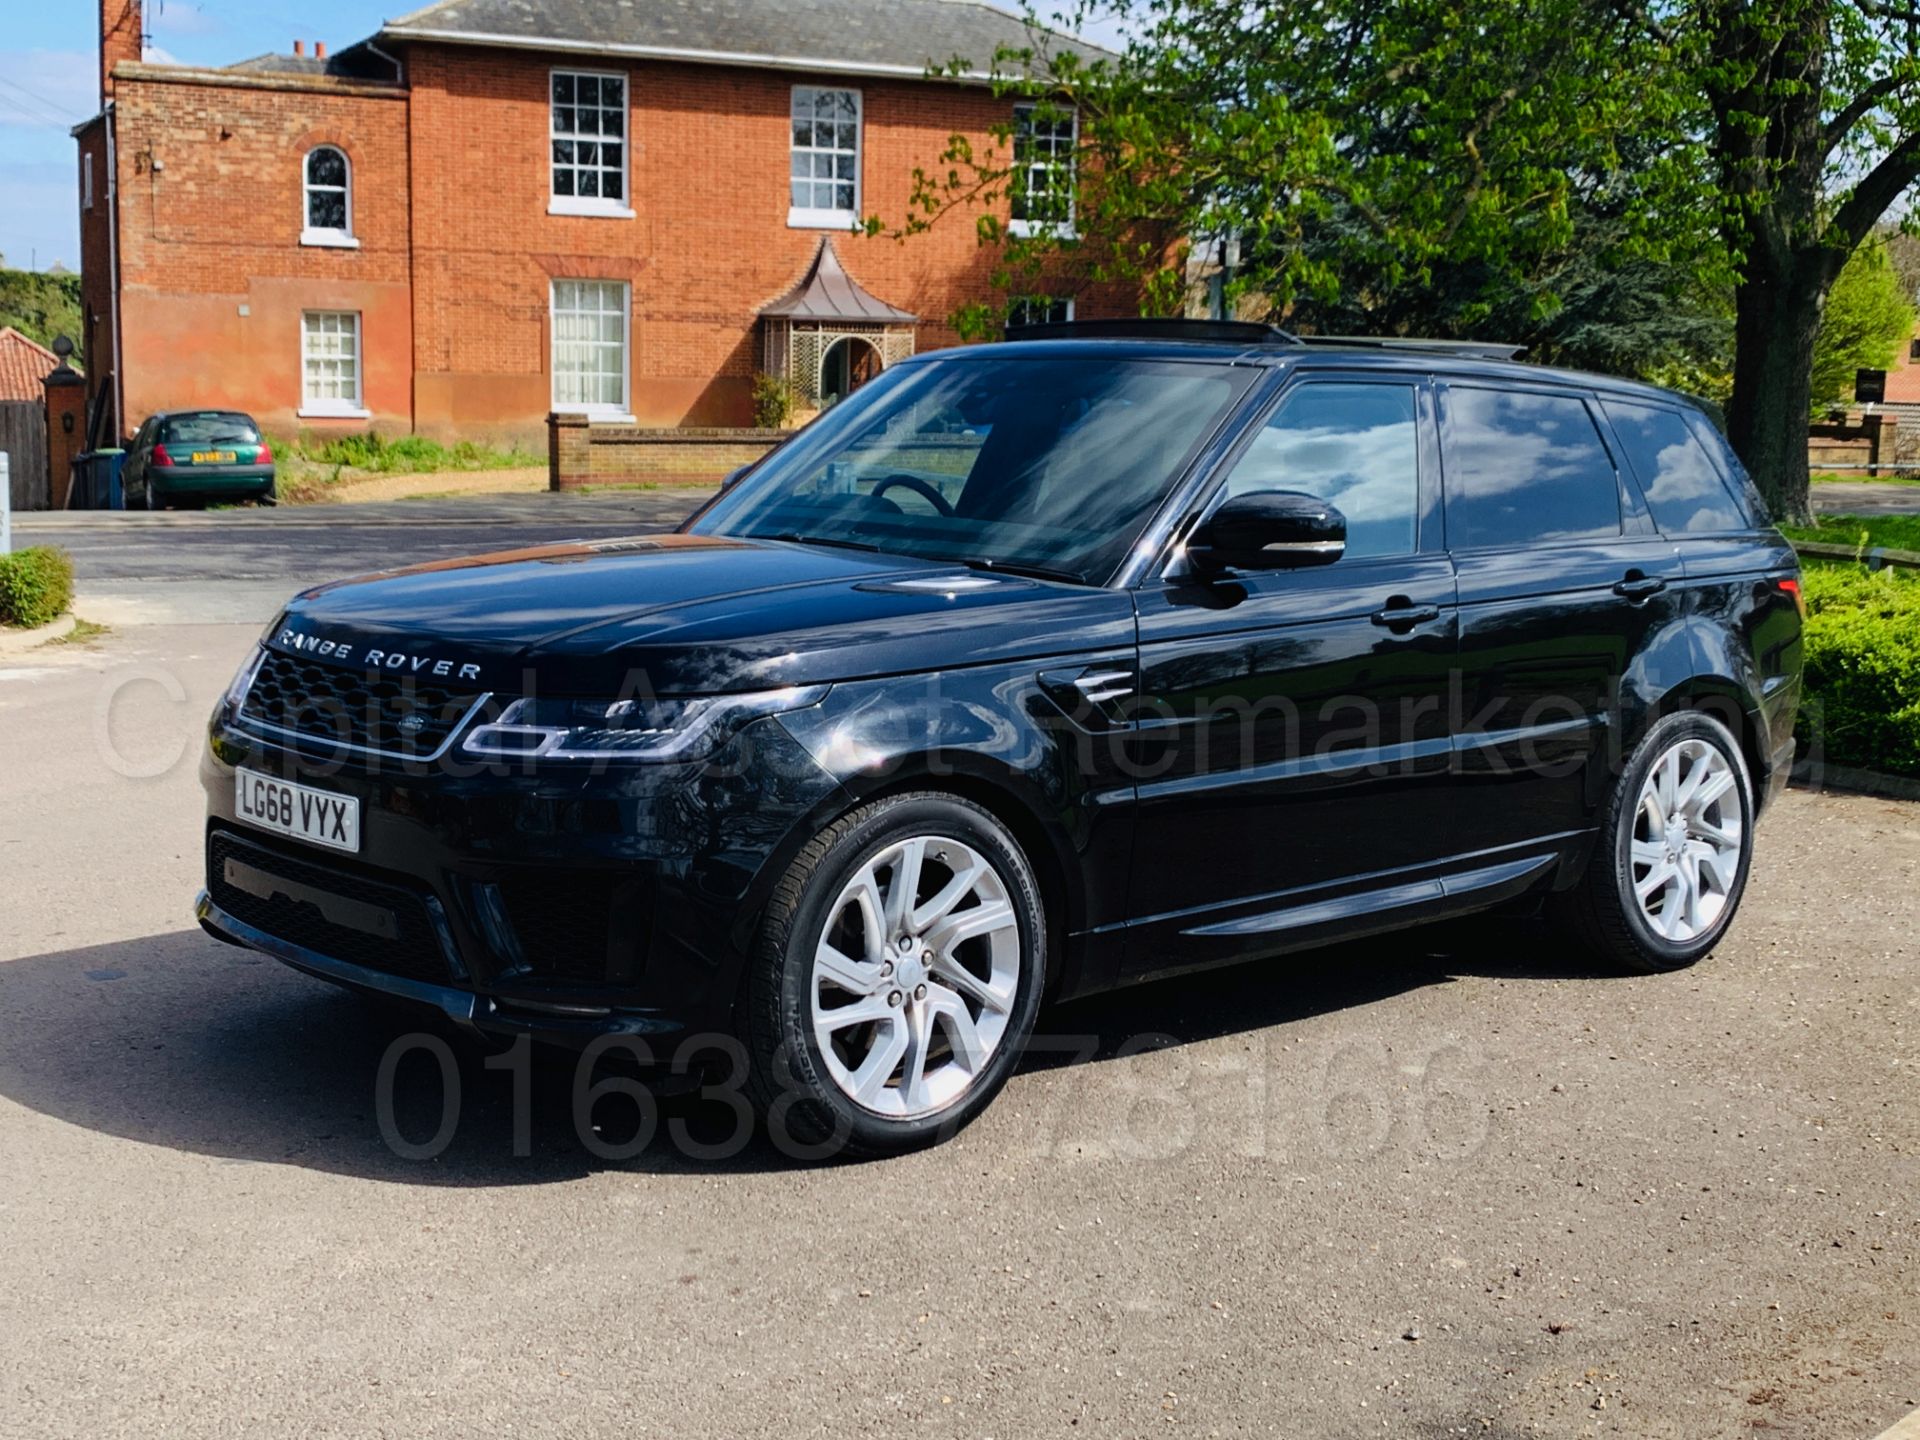 (ON SALE) RANGE ROVER SPORT *HSE* (2019 - ALL NEW MODEL) '3.0 SDV6 - 306 BHP - 8 SPEED AUTO' - Image 6 of 73